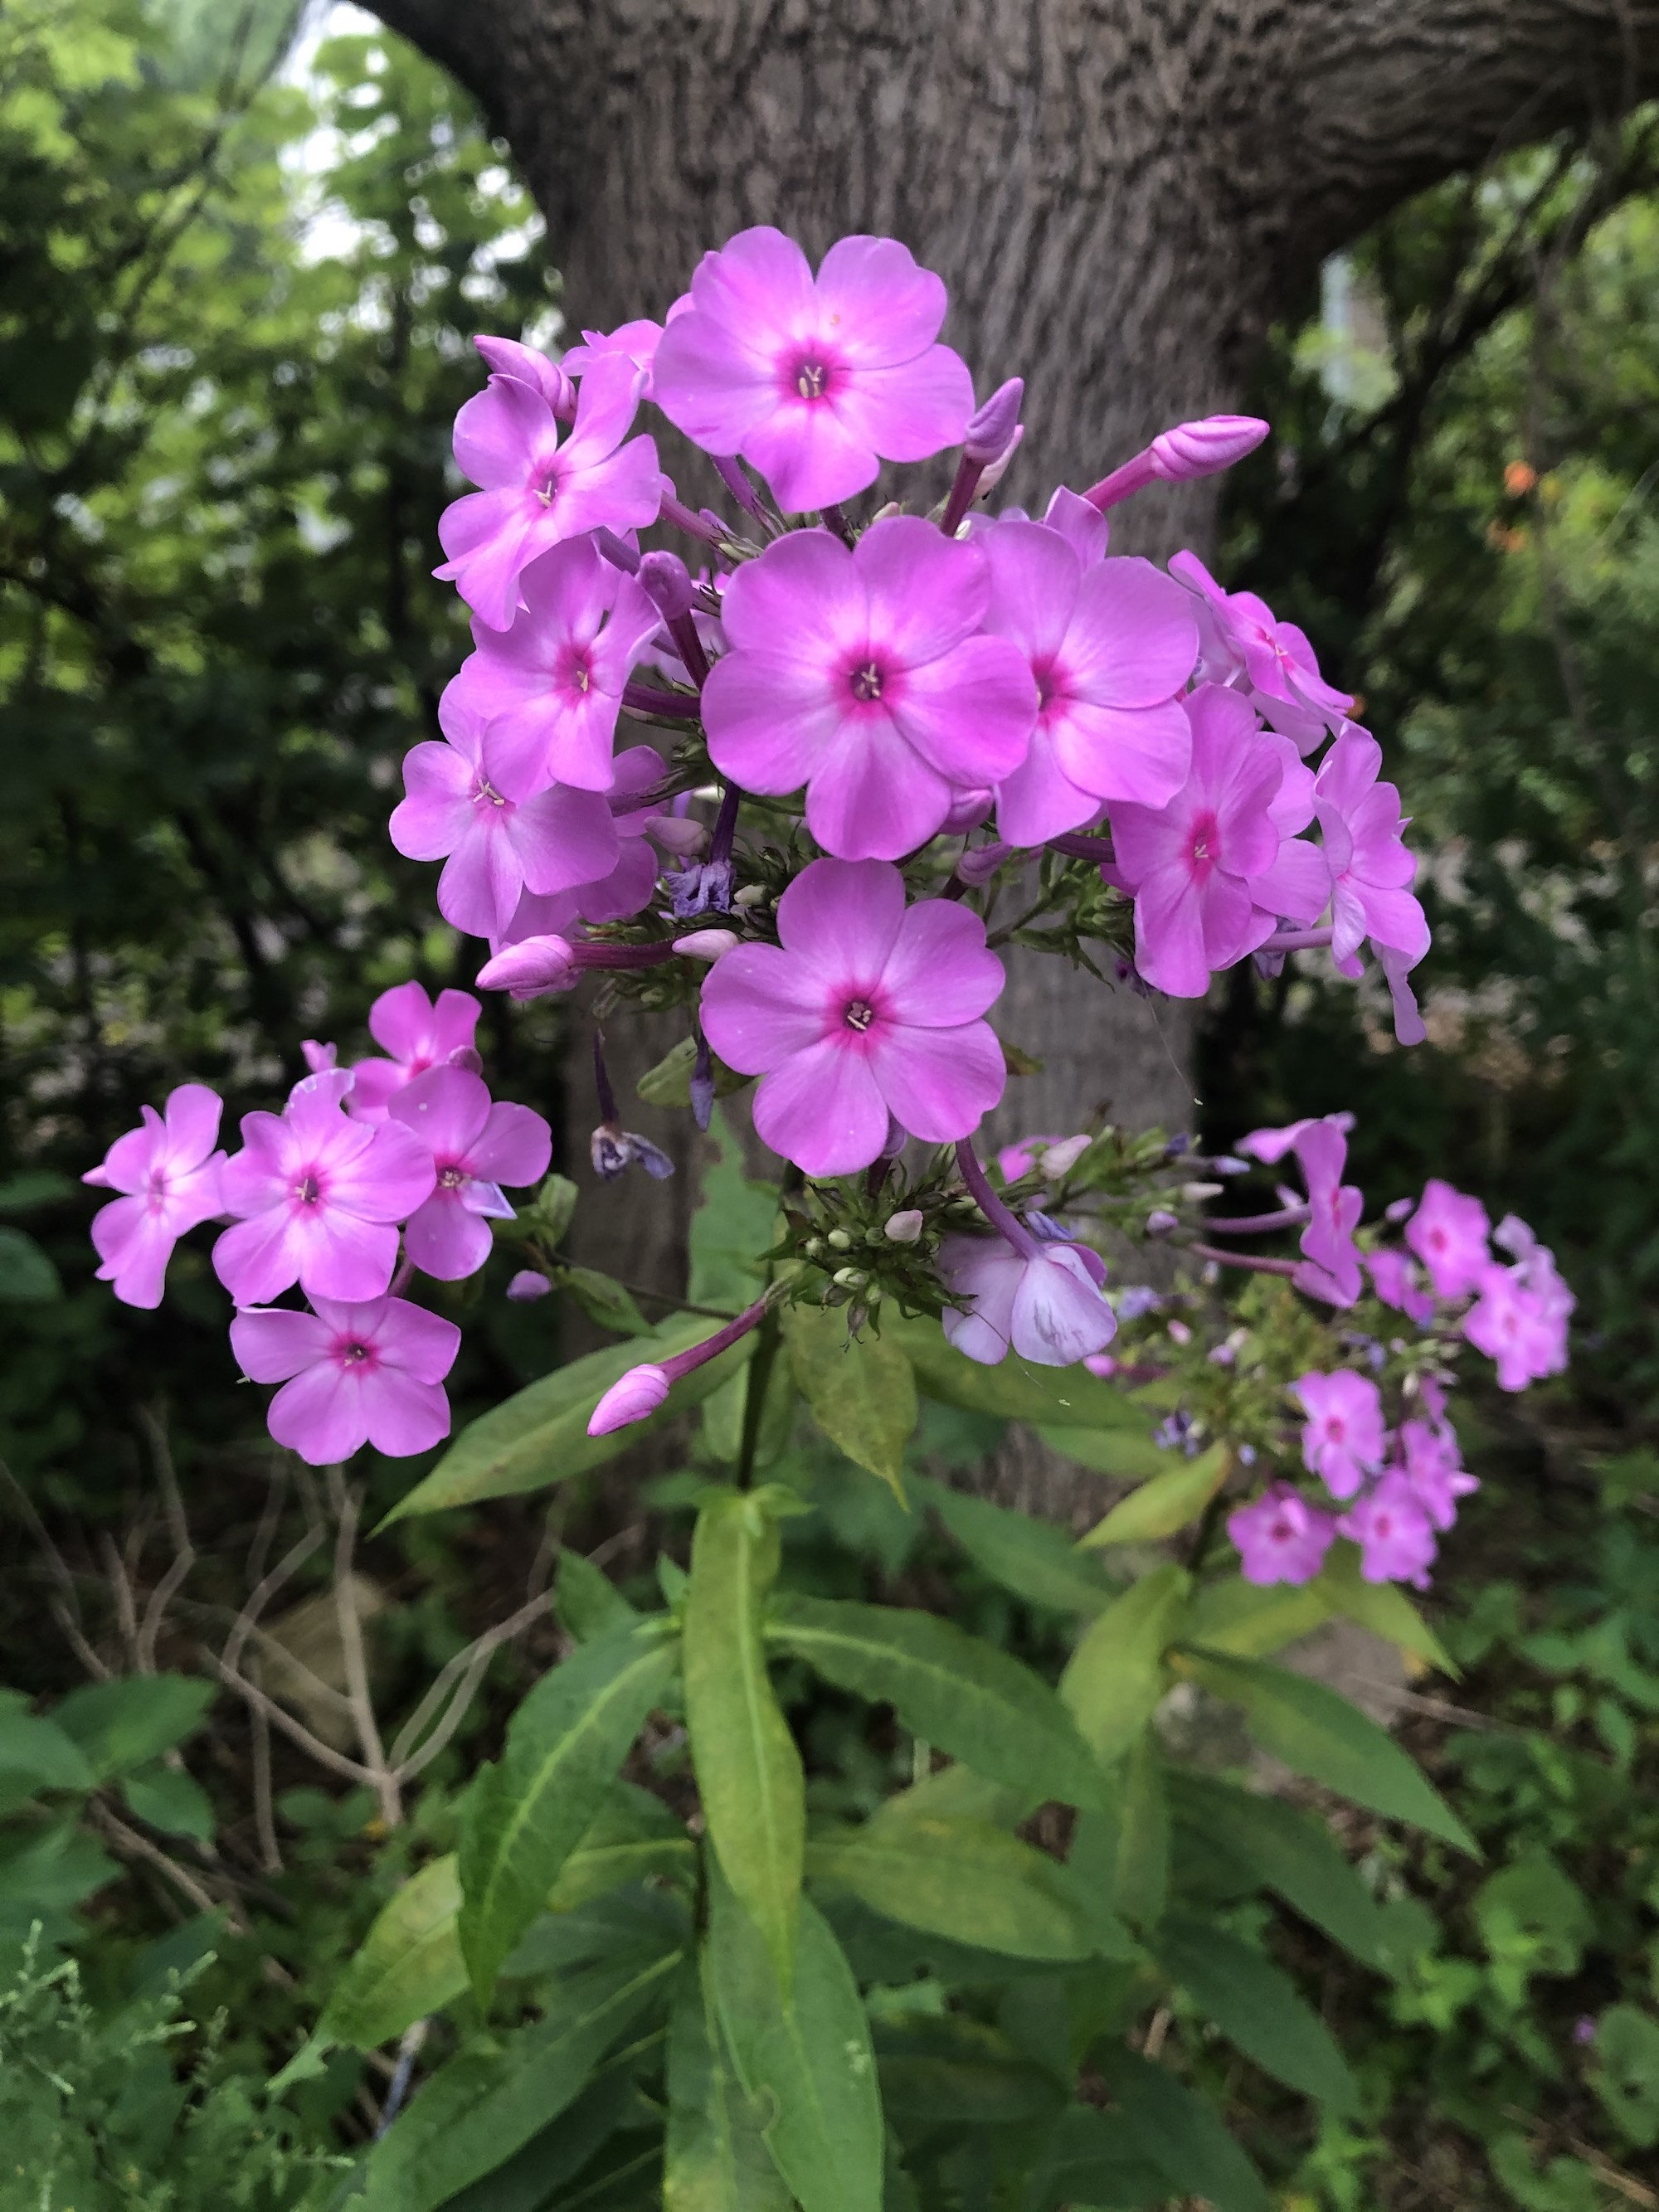 Tall Garden Phlox by Duck Pond on July 30, 2020.